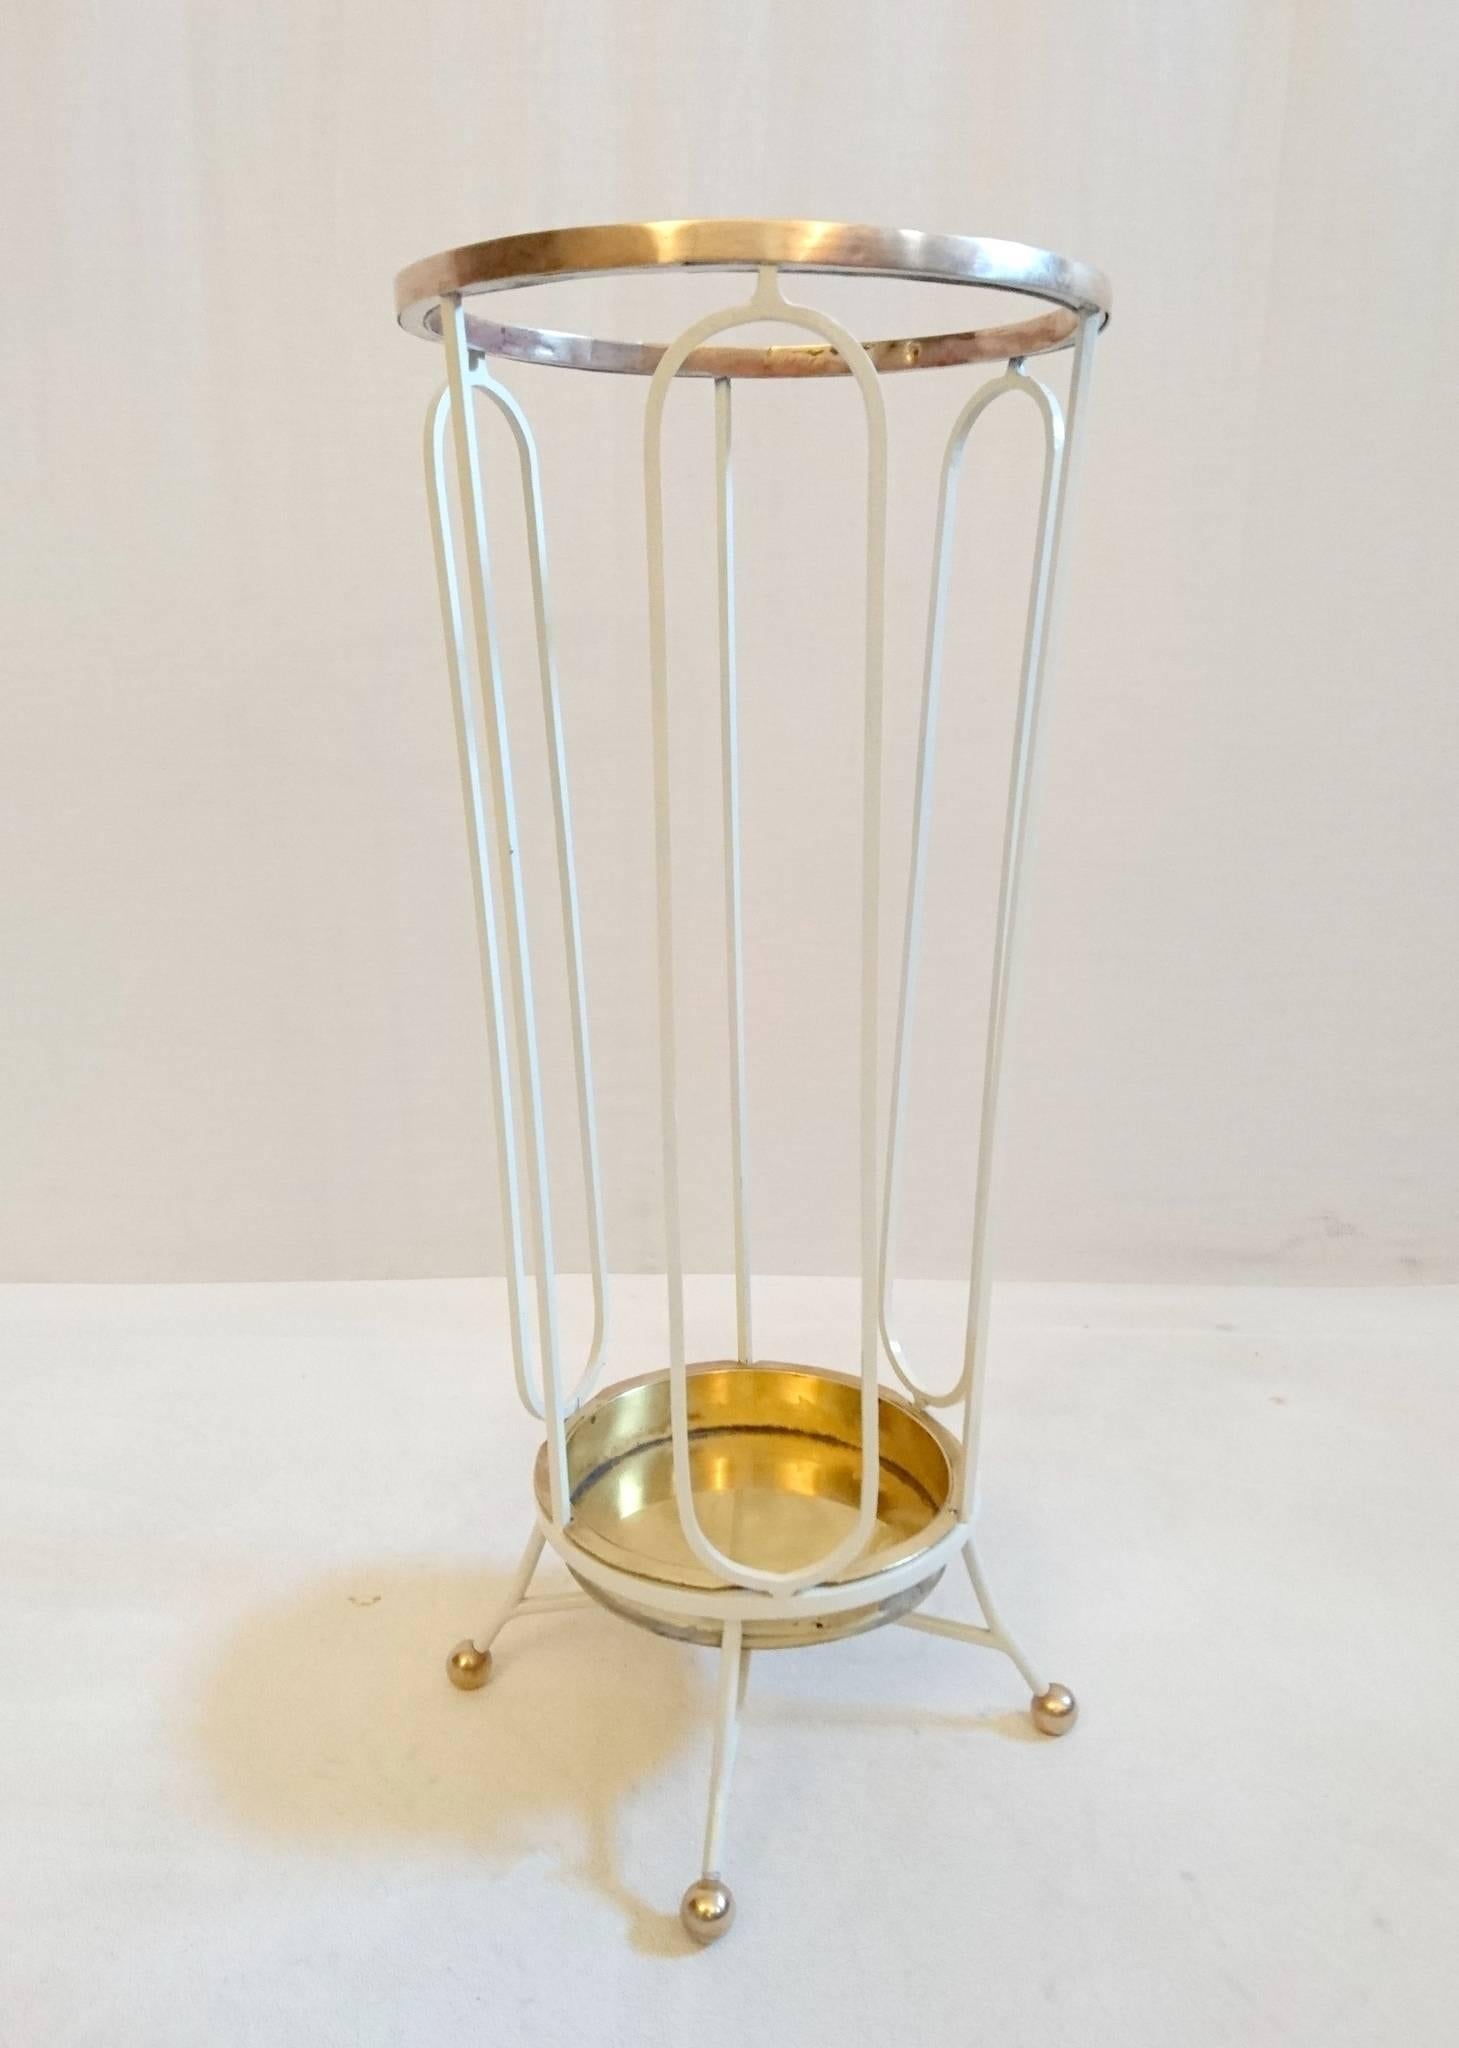 20th Century Umbrella Stand in the Manner of Mathieu Matégot